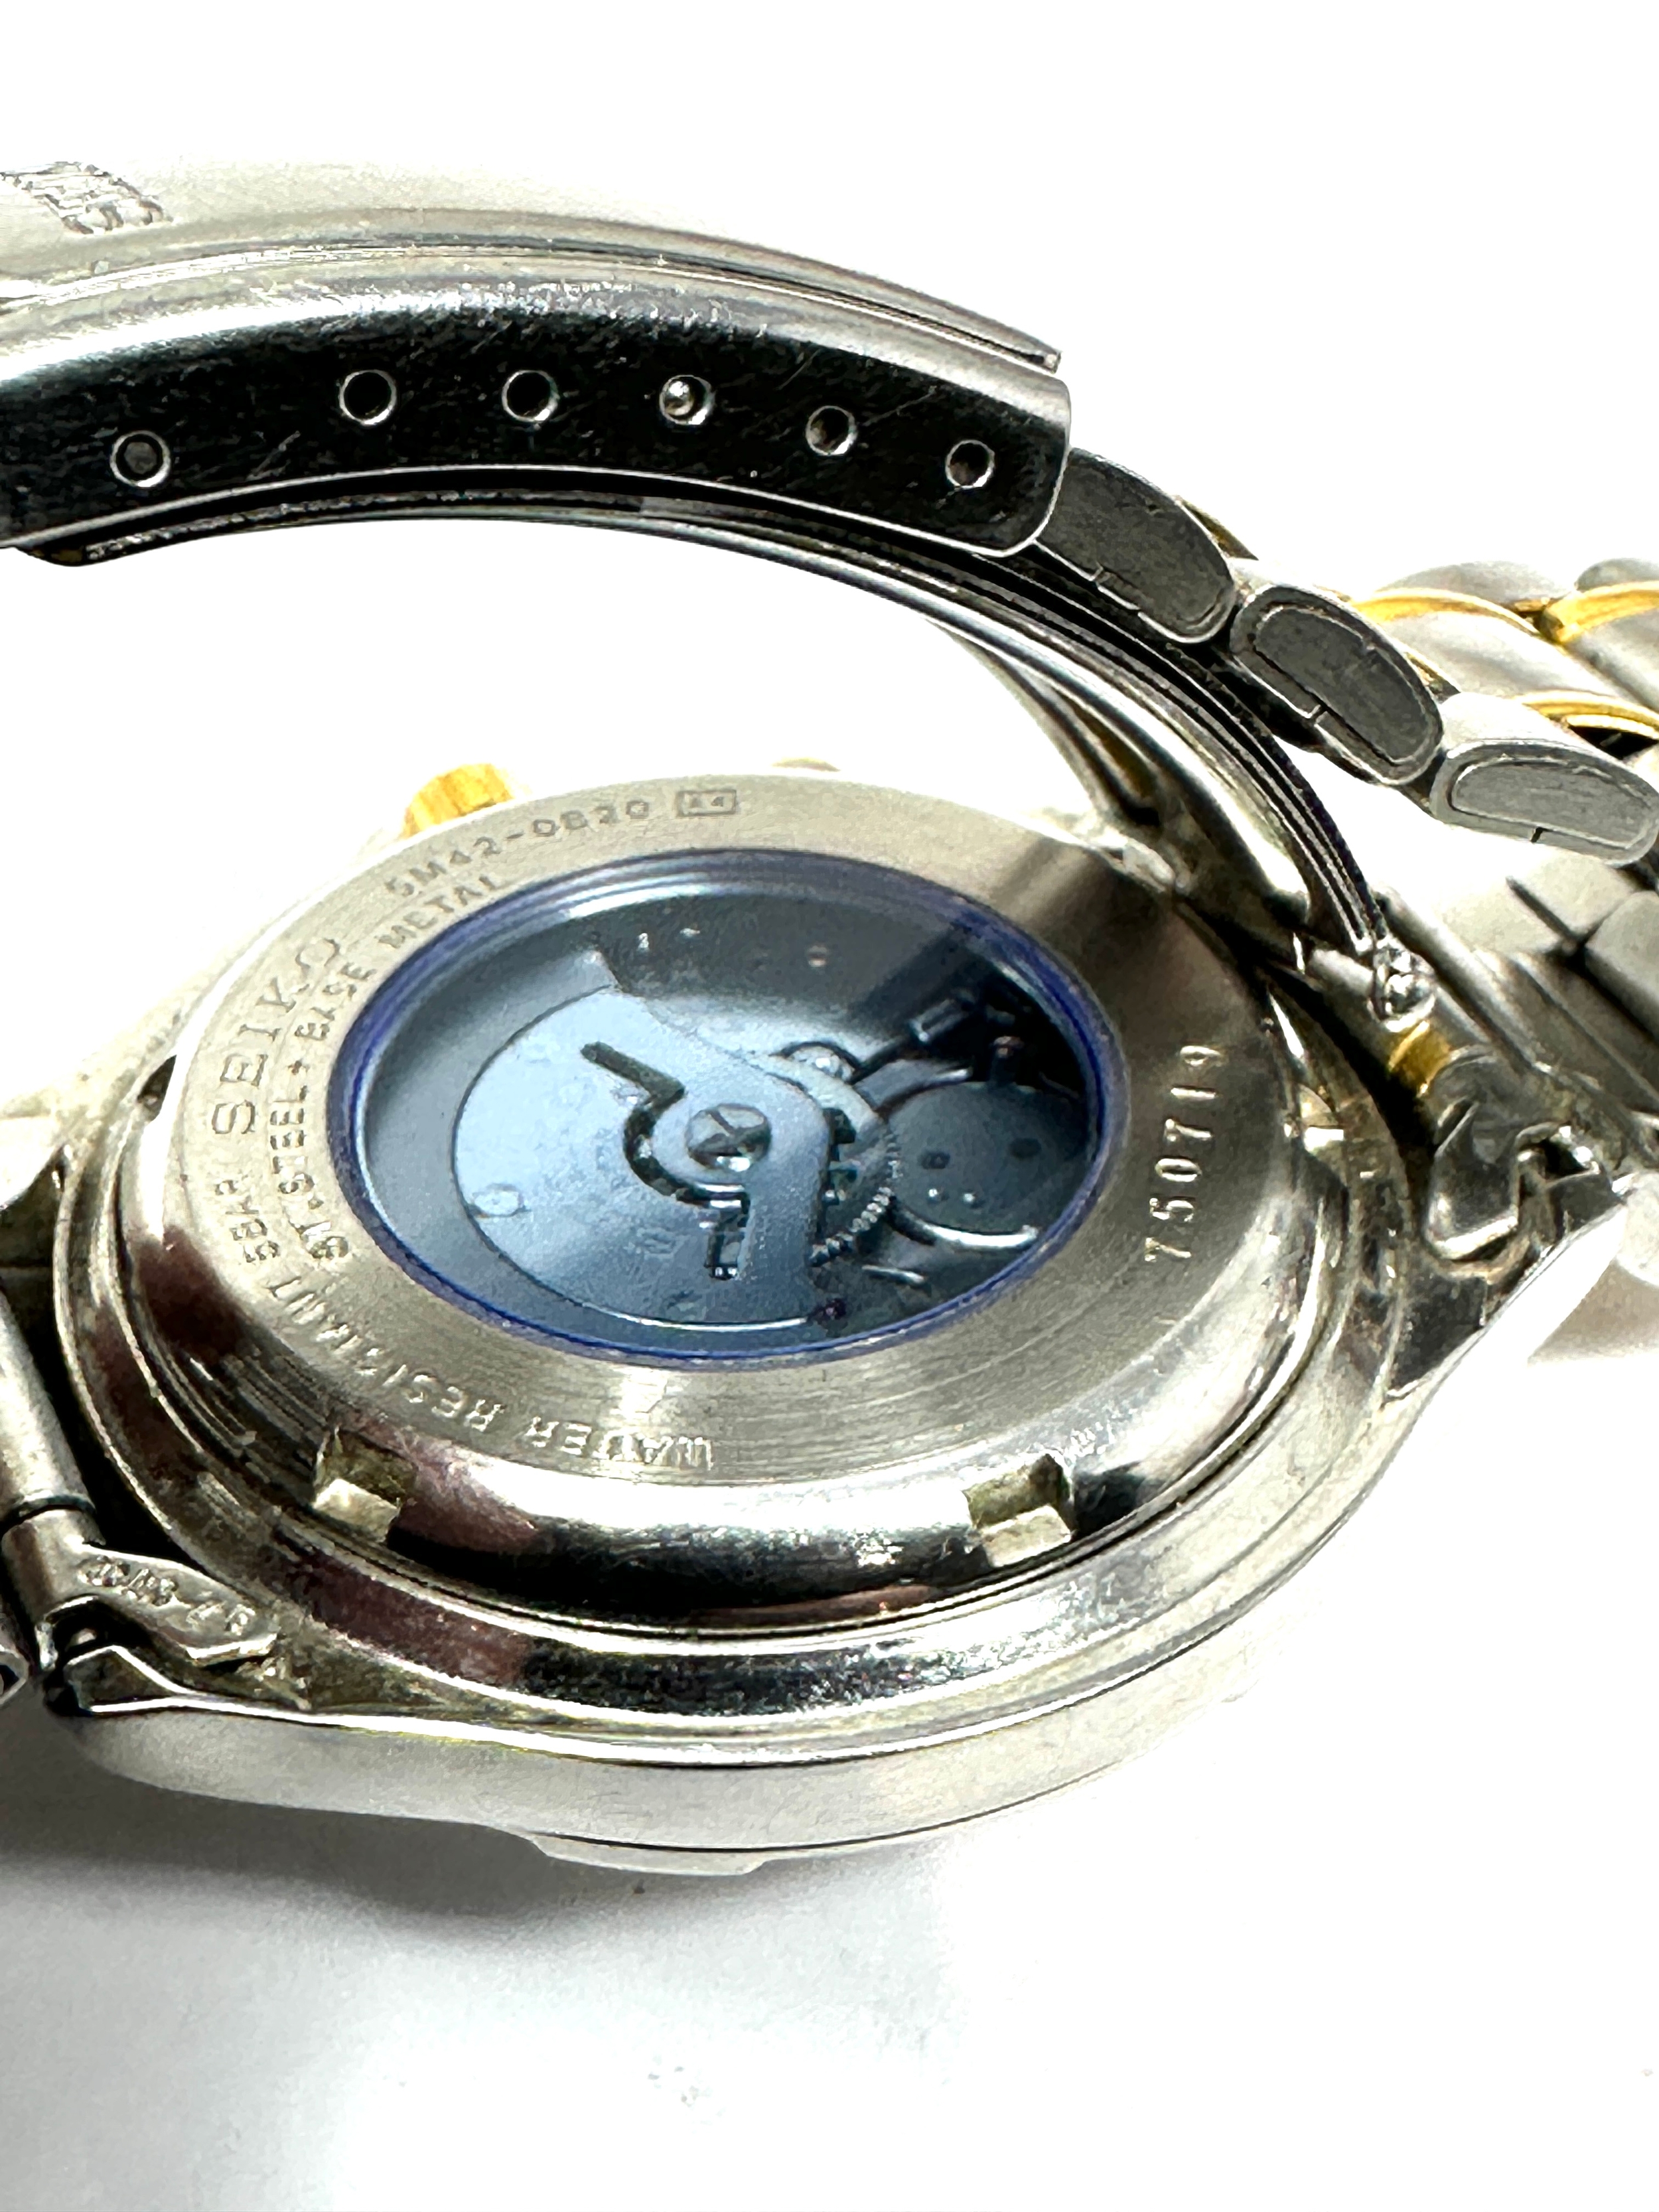 Gents Seiko kinetic sq 50 the watch does tick - Image 3 of 3